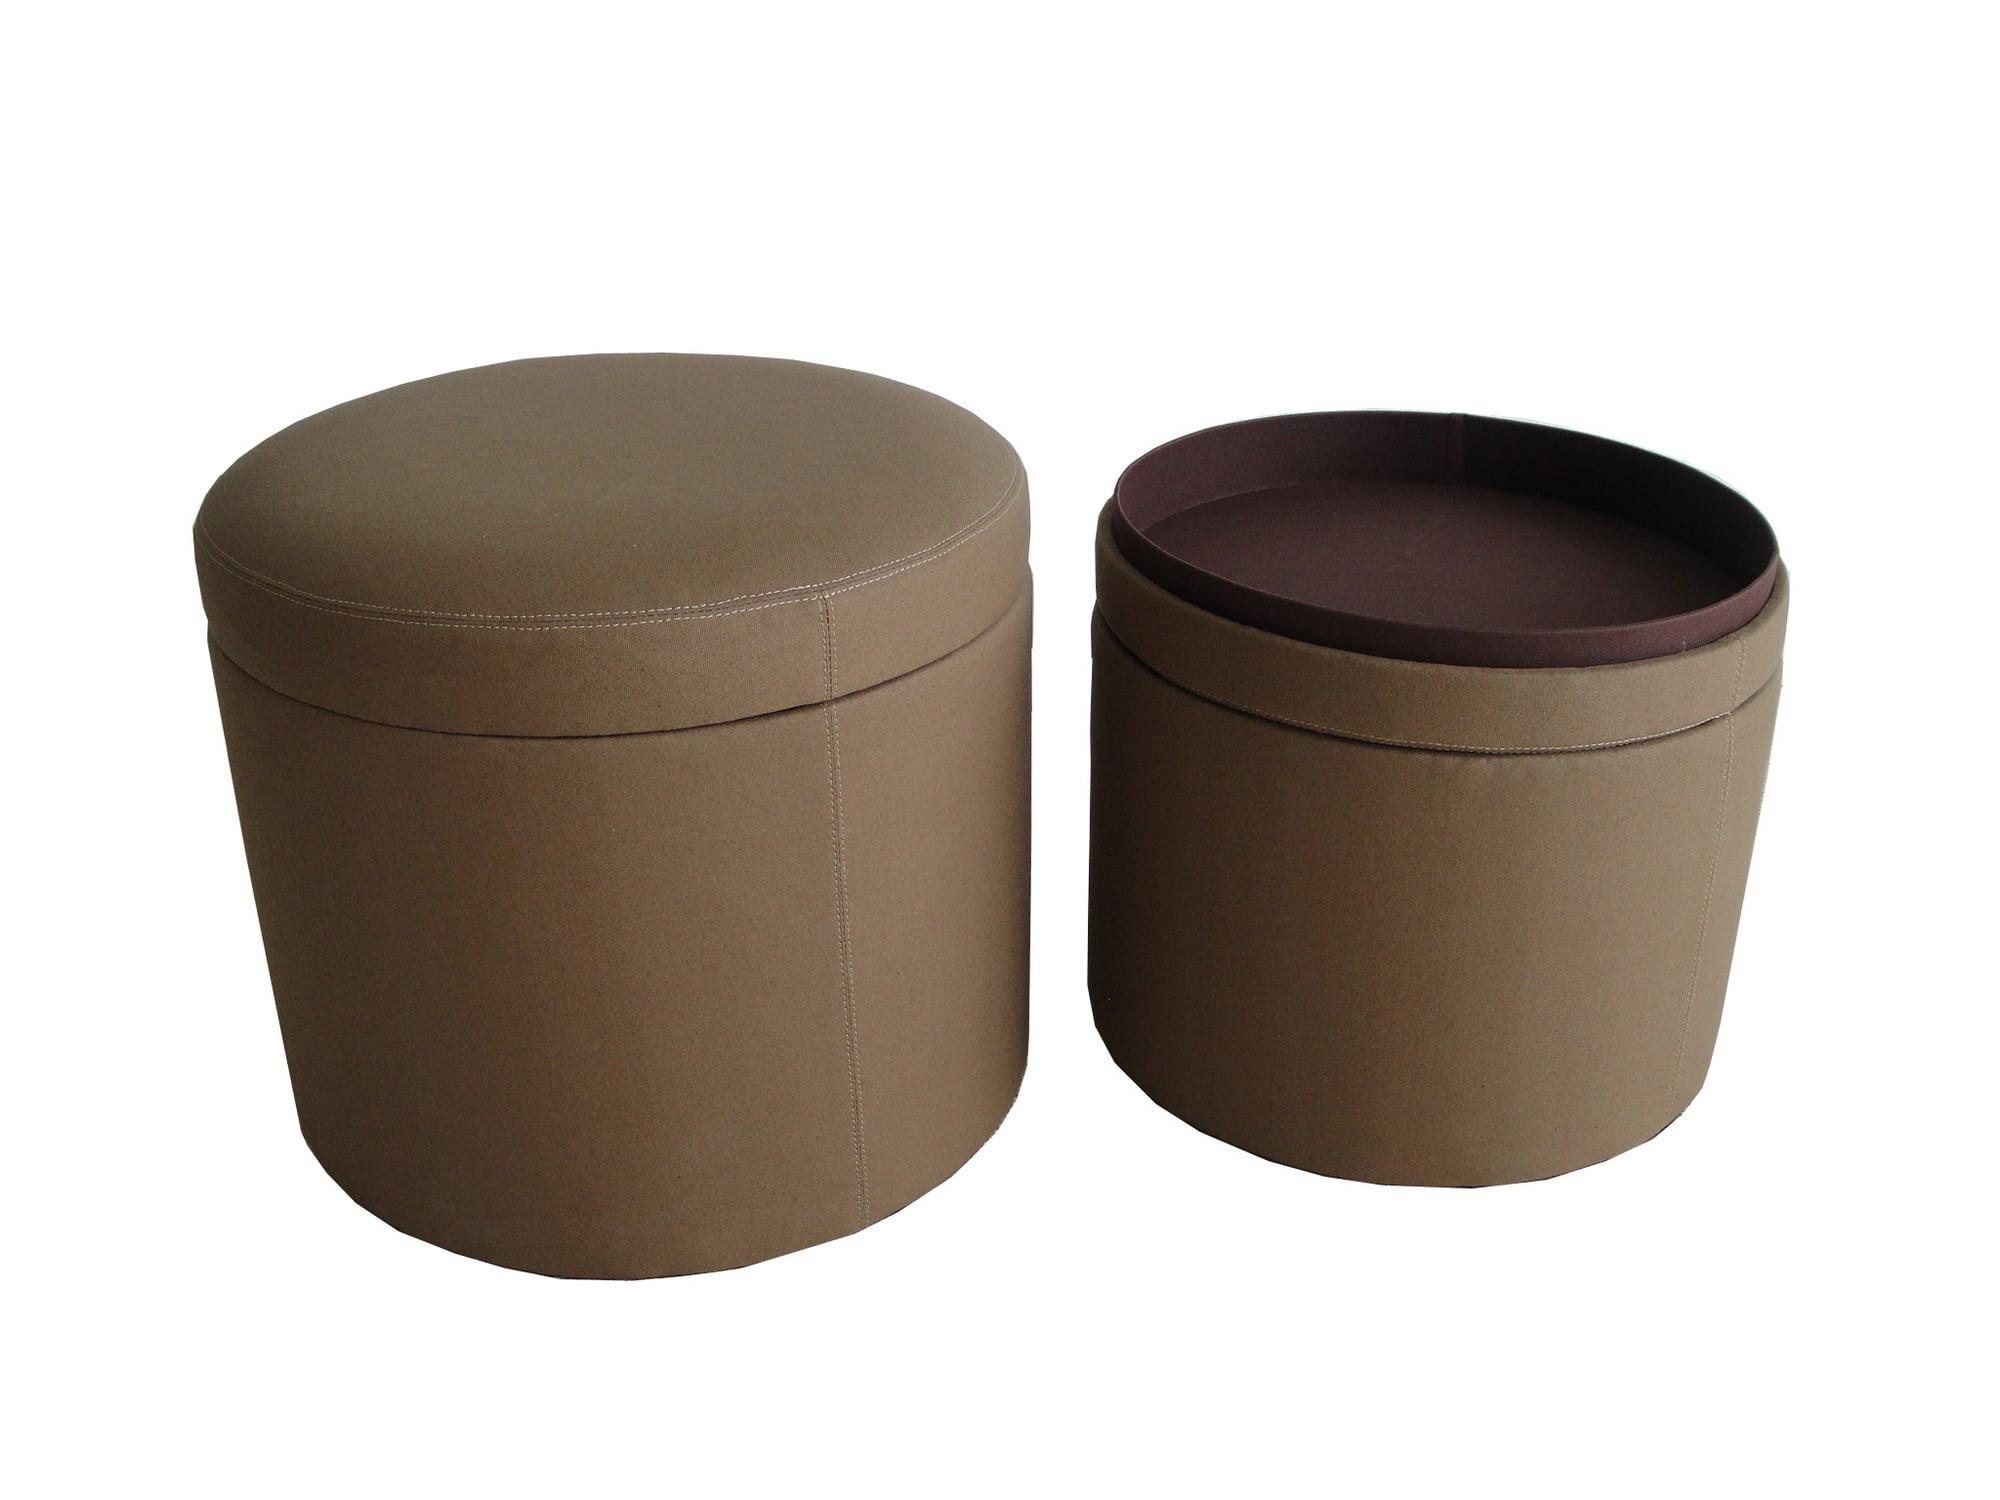 19" Tan Canvas Round Storage Ottoman with Faux Leather Accents